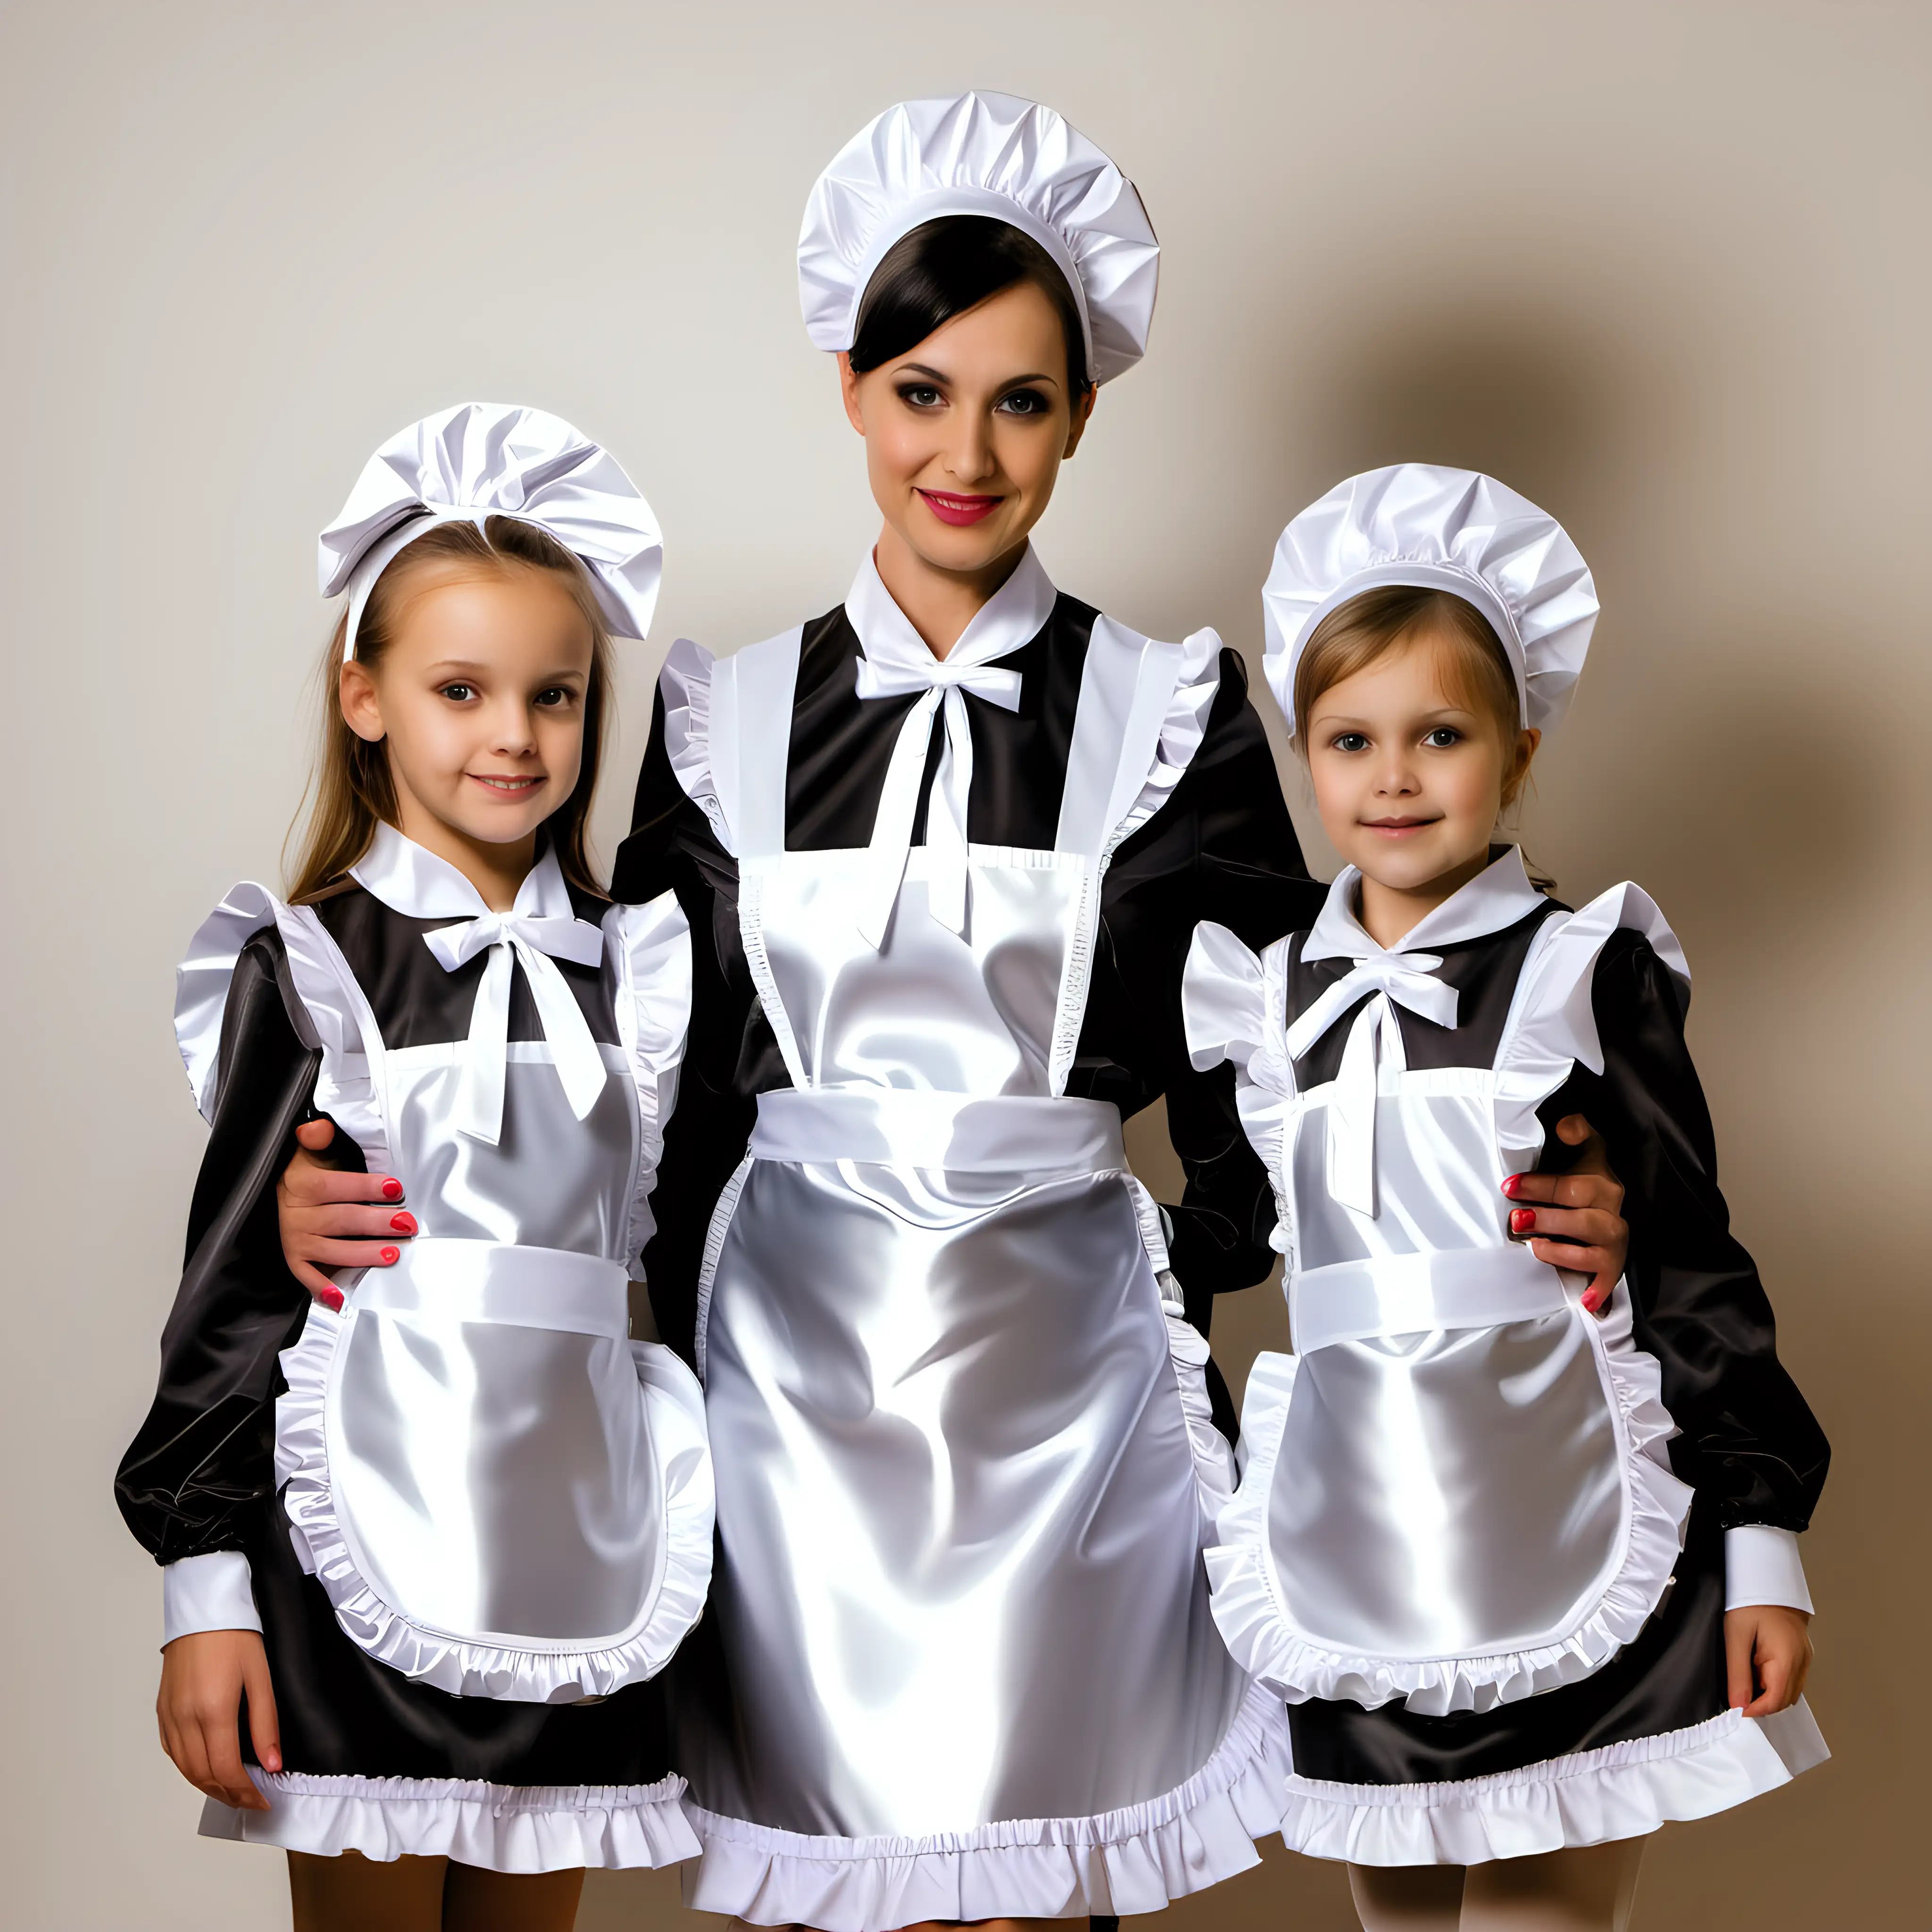 Charming MotherDaughter Duo in Satin Maid Uniforms